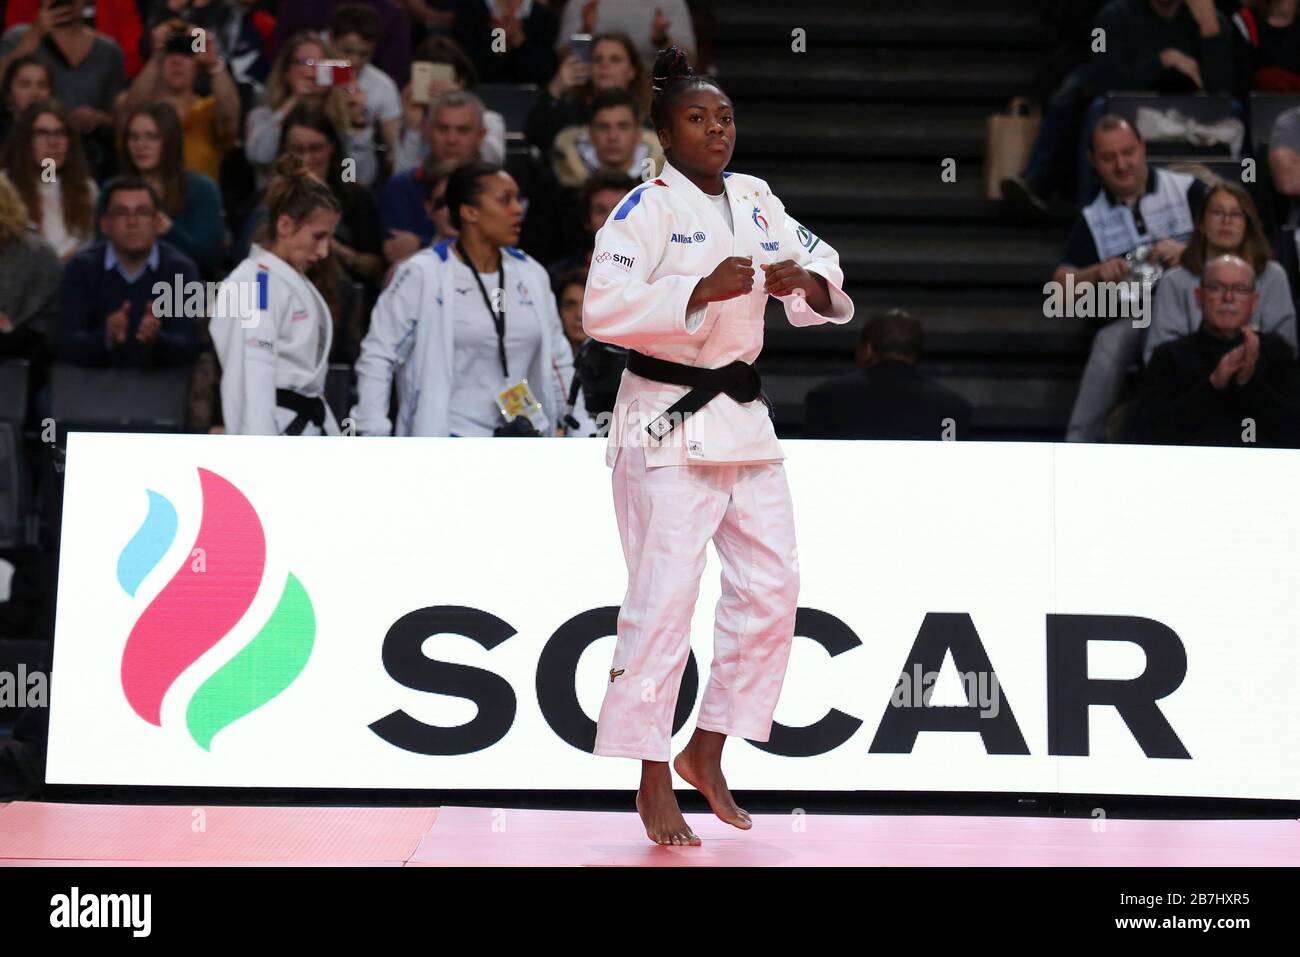 Paris, France - 08th Feb, 2020: Clarisse Agbegnenou for France against Van den Berg for Netherlands, Women's -63 kg, Round three (Credit: Mickael Chavet) Stock Photo